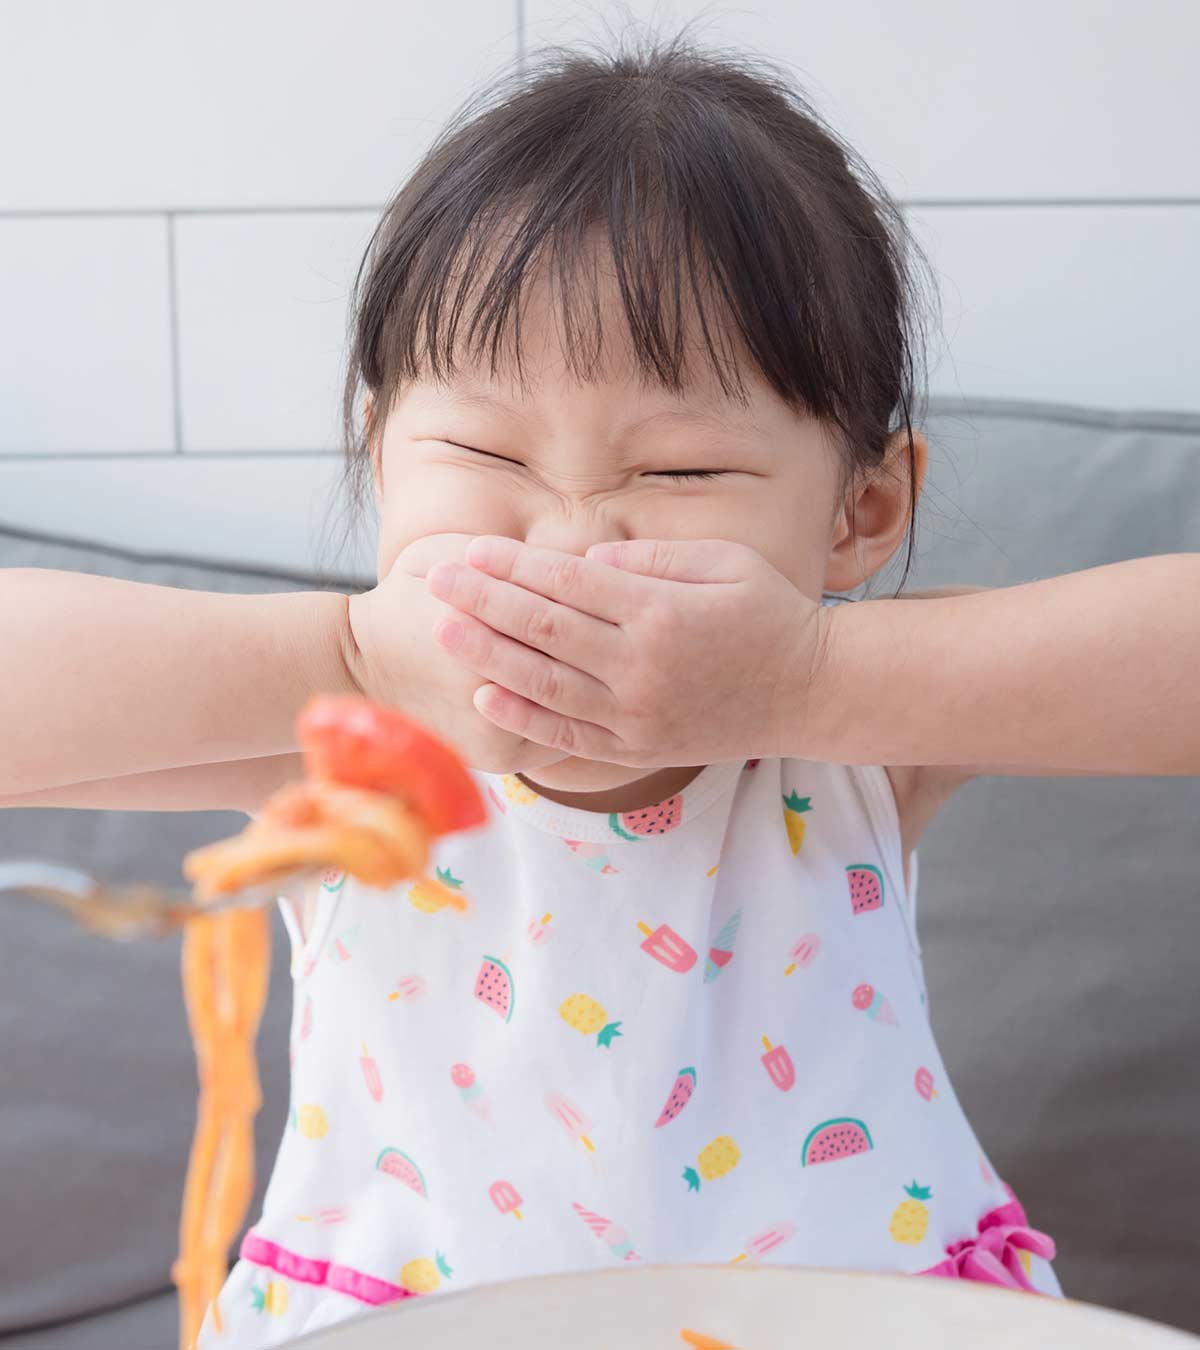 5 Things Moms Of Picky Eaters Are Tired Of Hearing